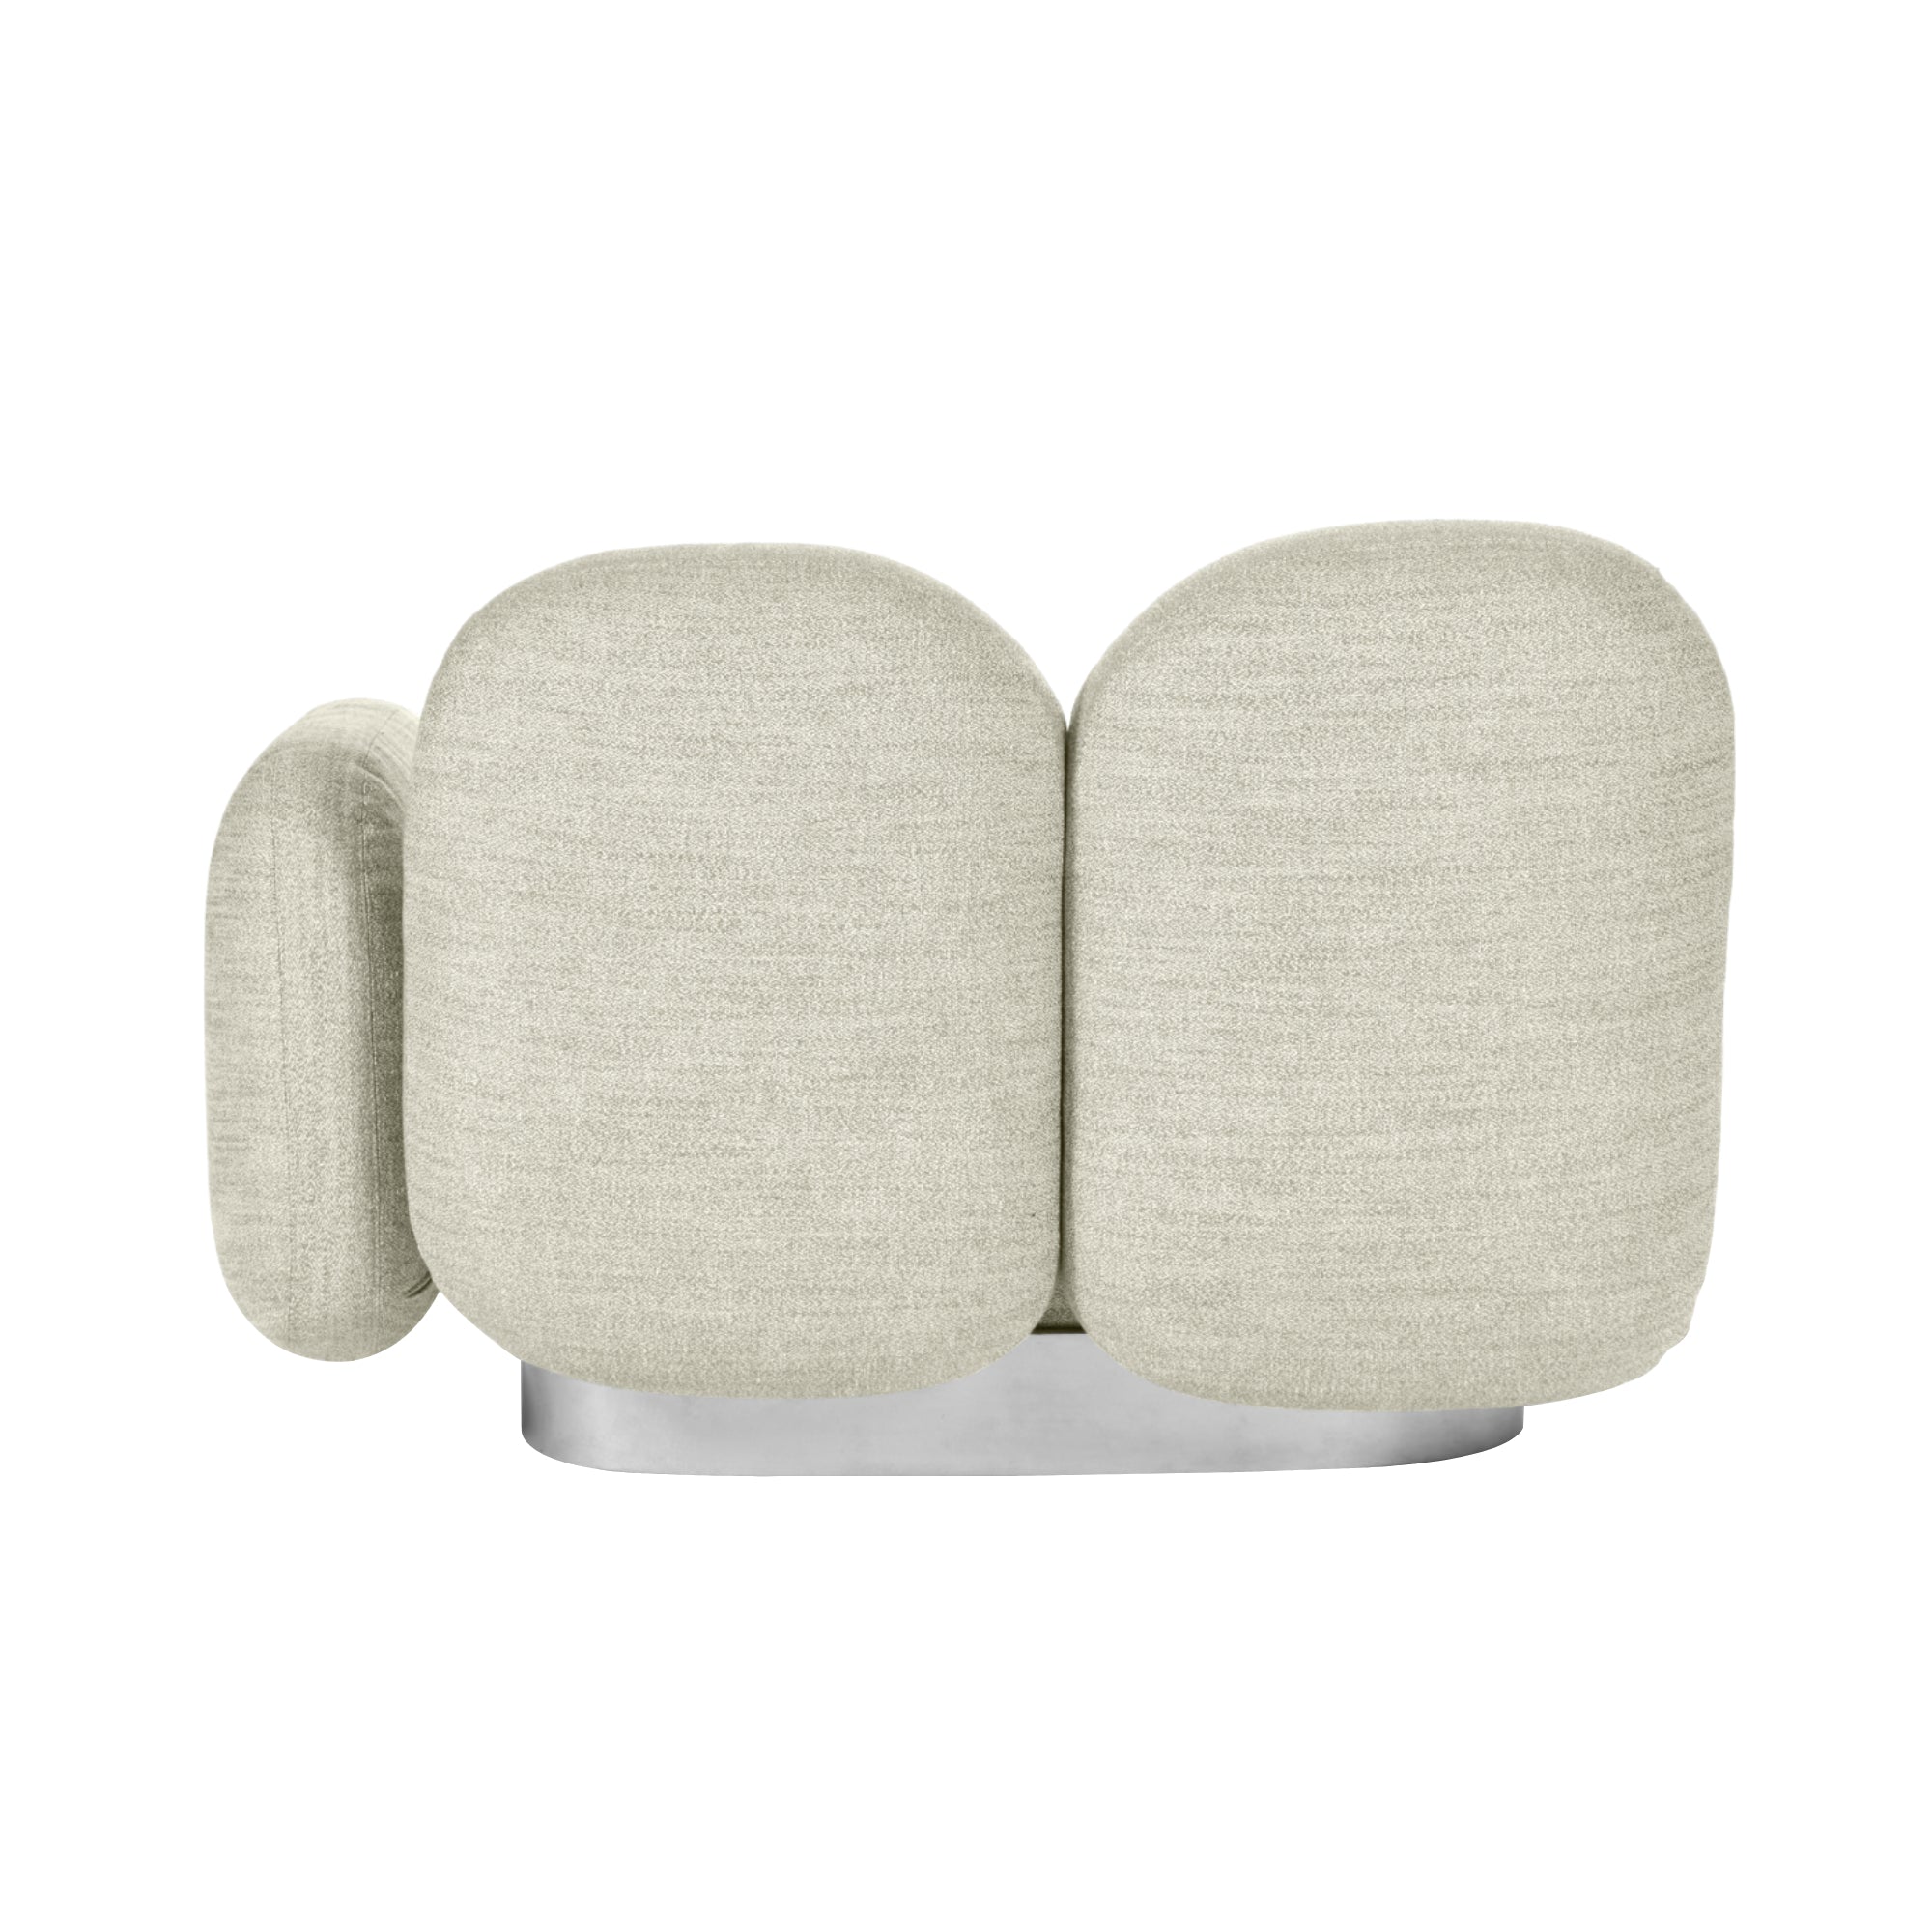 Assemble 1 Seat Sofa: Gijon Sand + With Right Arm